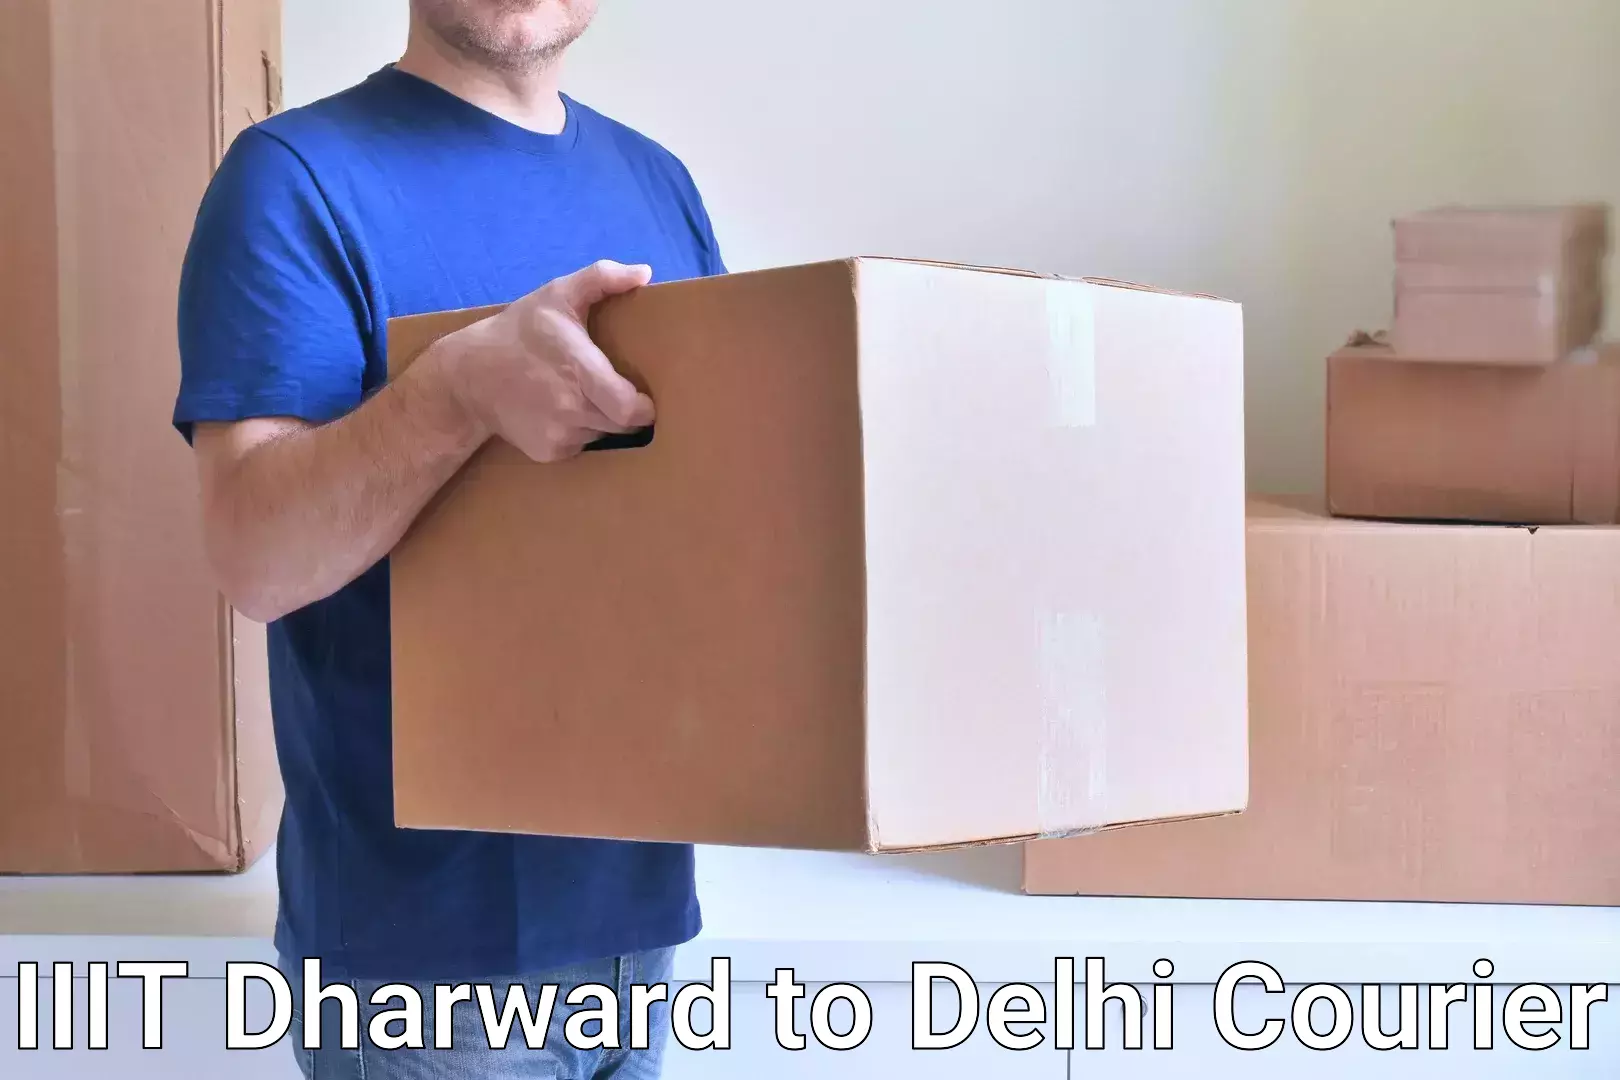 Express delivery solutions IIIT Dharward to Lodhi Road